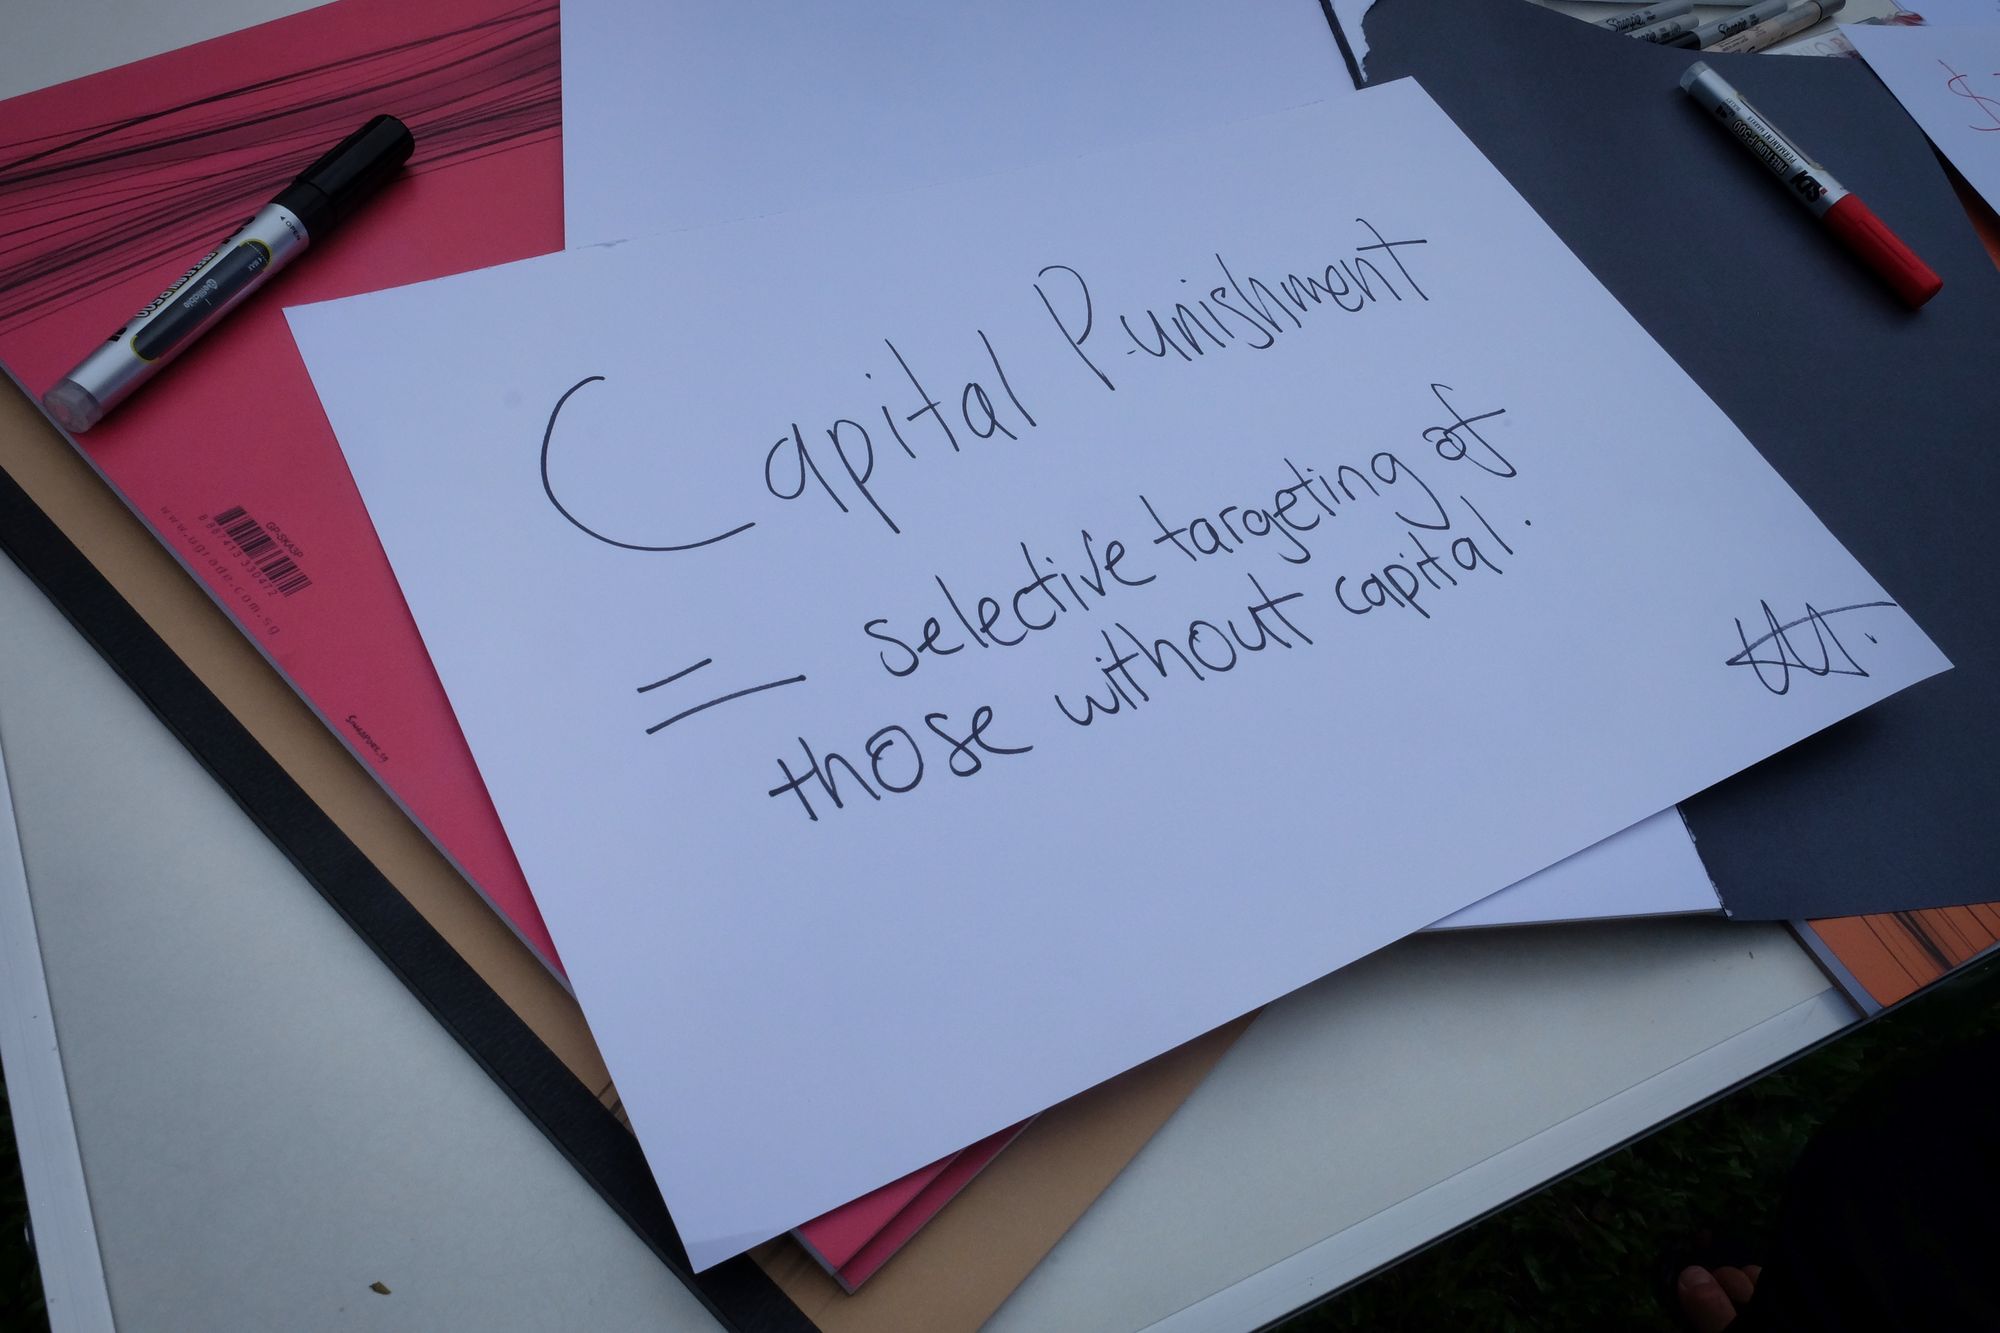 A placard that reads: "Capital Punishment = Selective Targeting of Those Without Capital"